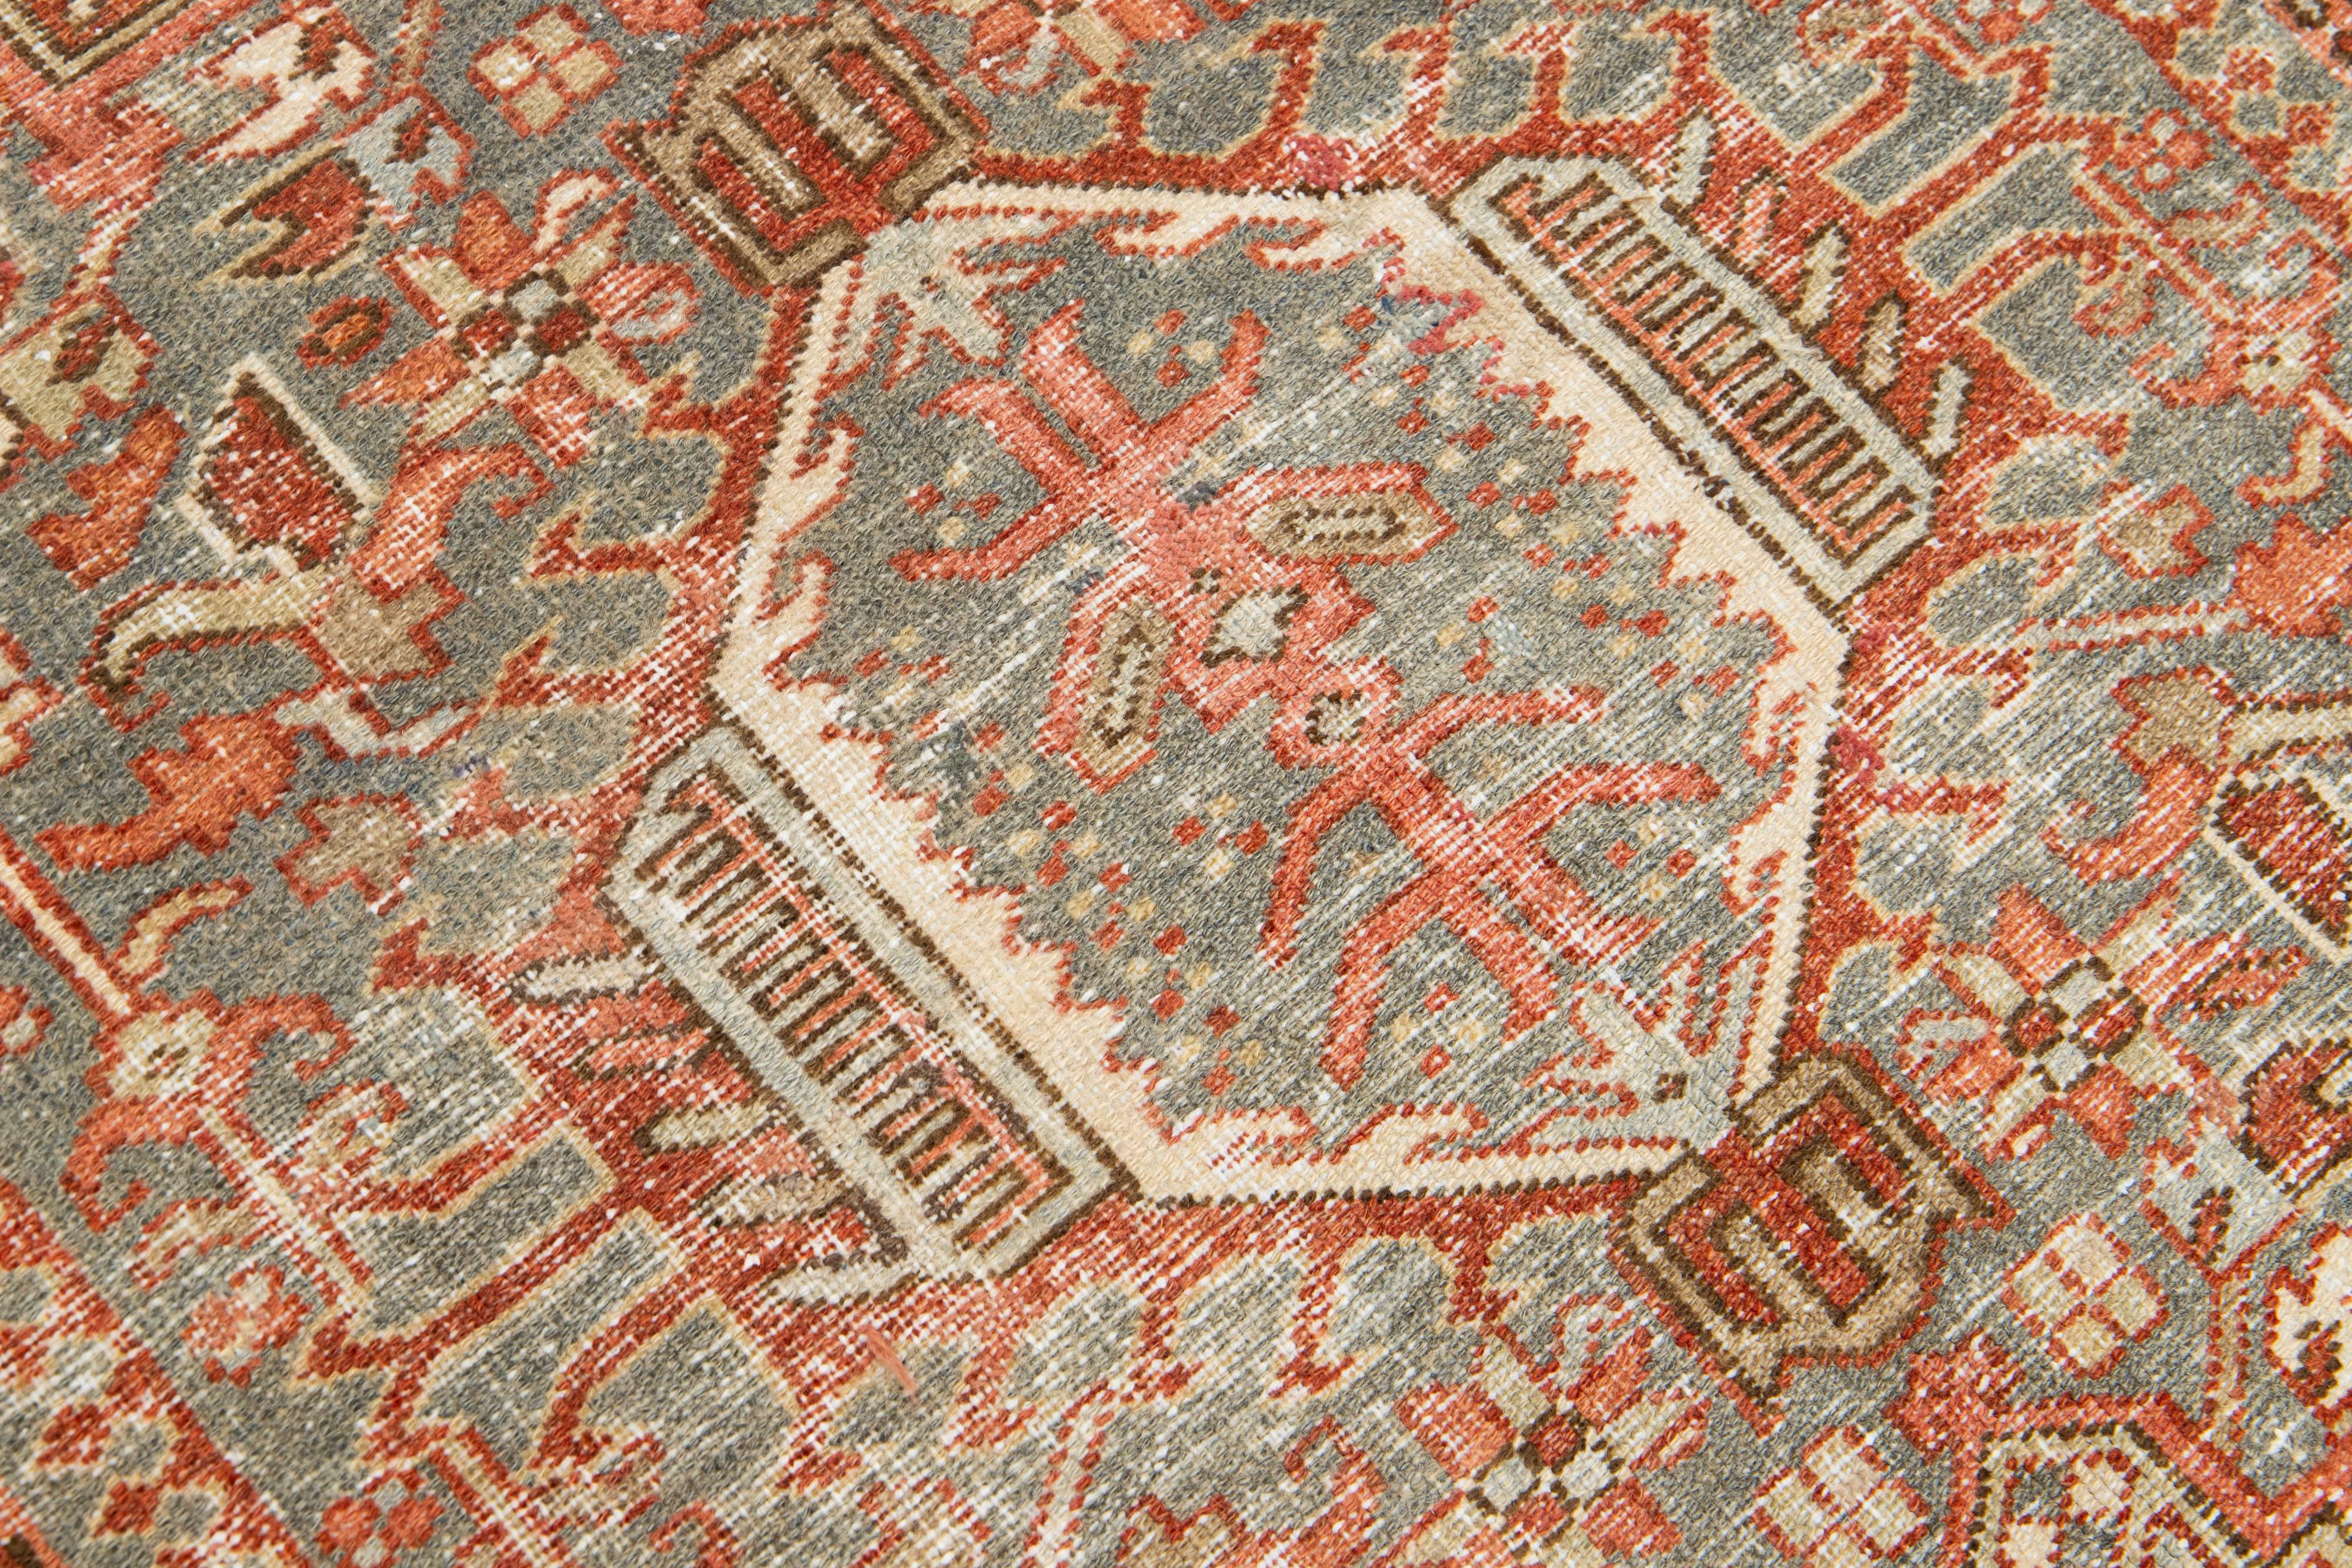 Antique Persian Heriz Wool Rug Featuring an Allover Motif In Rust In Good Condition For Sale In Norwalk, CT